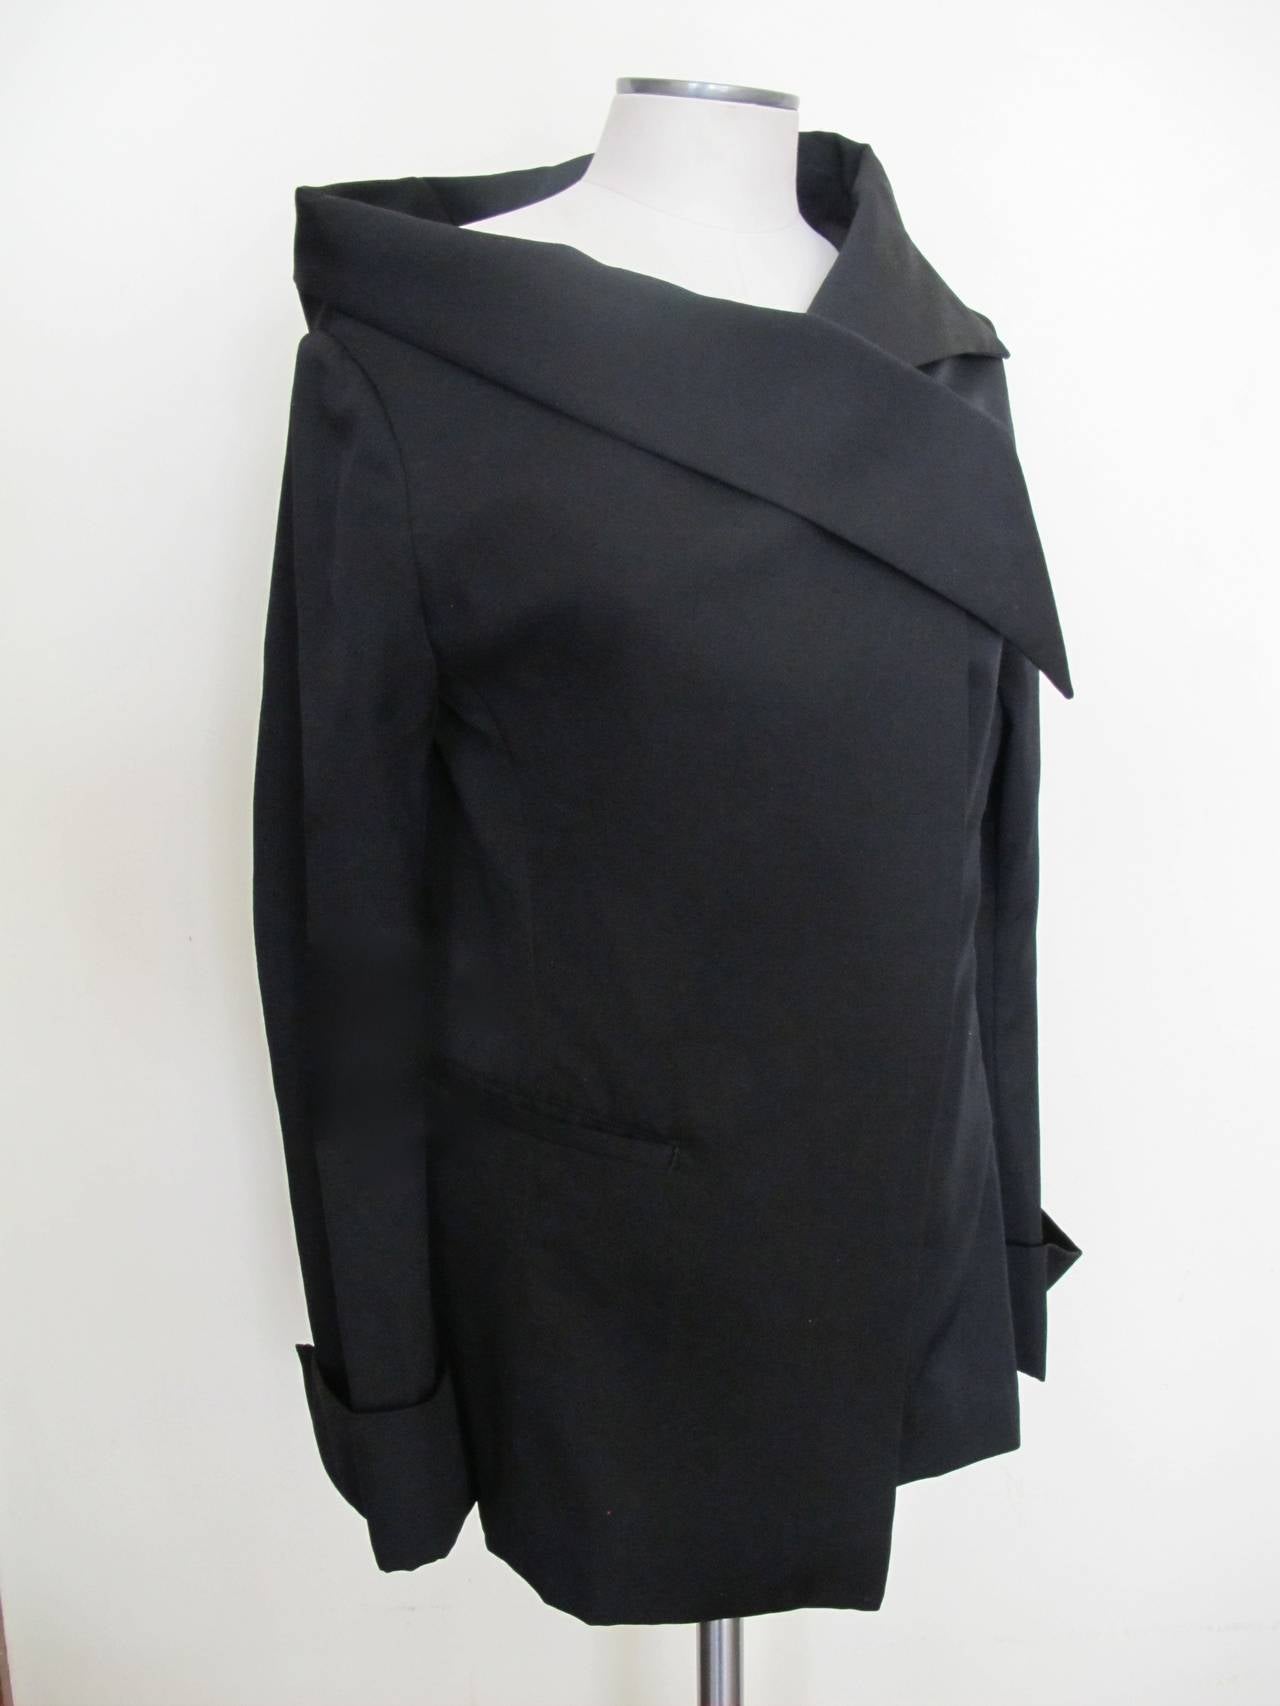 It has the unique touch of one pocket on the right. The shoulder is slanted on the right and the other is a drop shoulder. The jacket is open and flows elegantly on the body. One shoulder falls down and the other shoulder is upright. Sleeve length